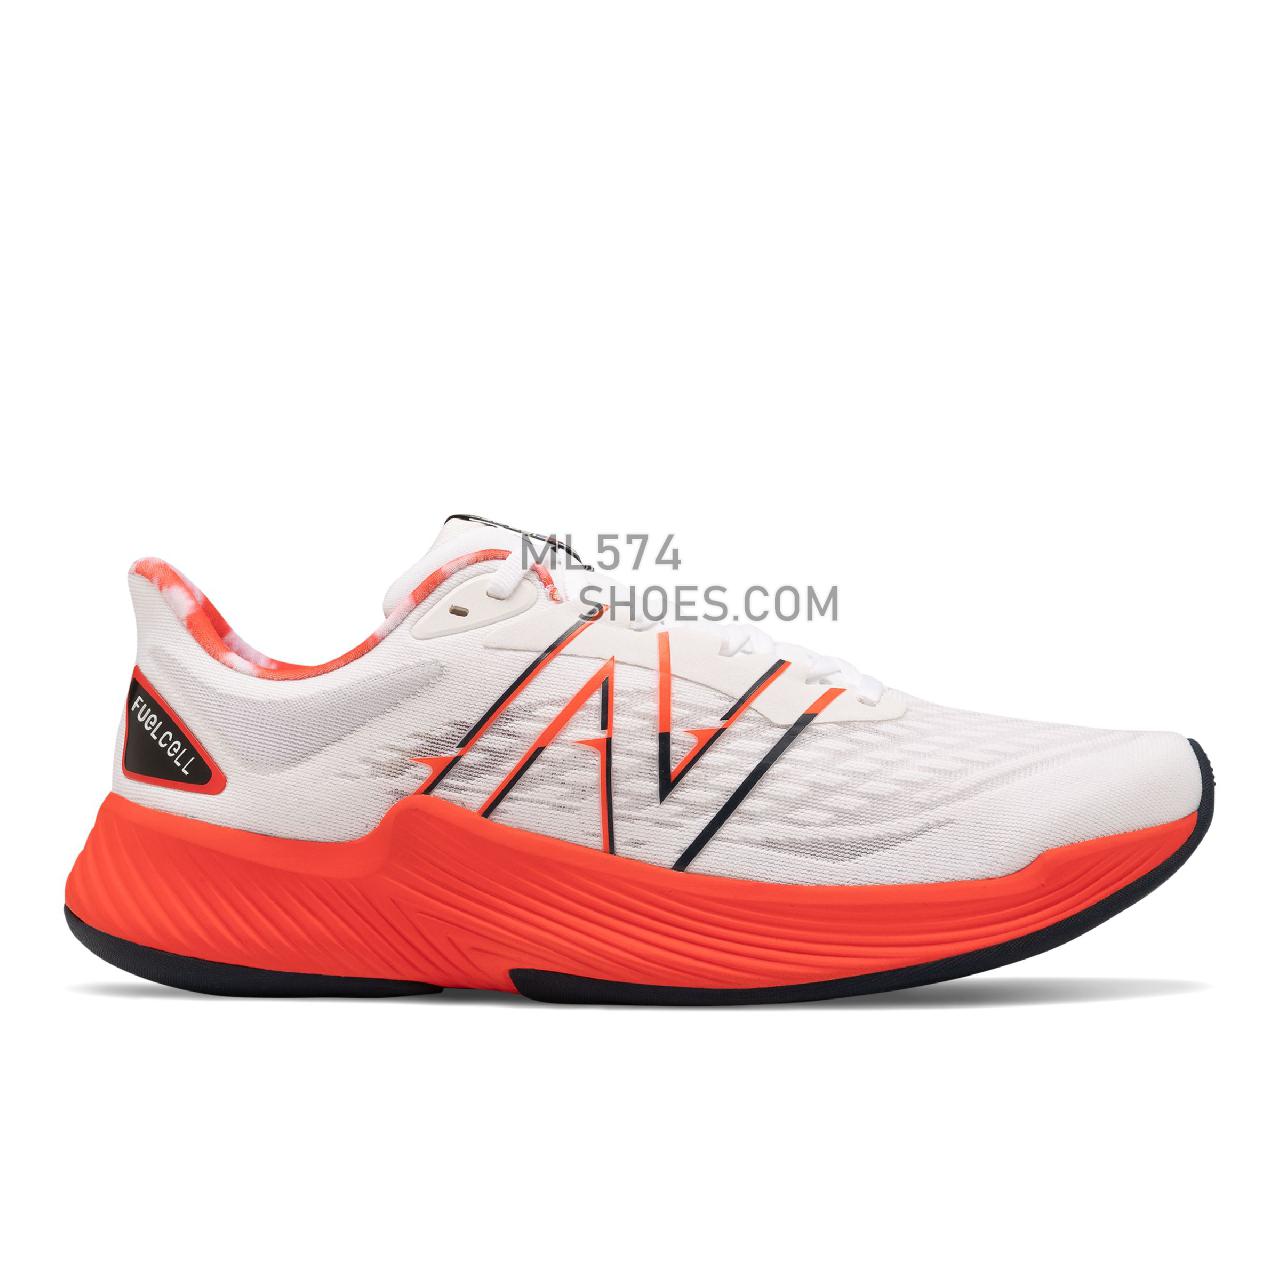 New Balance FuelCell Prism v2 - Men's Stability Running - White with Eclipse - MFCPZZ2